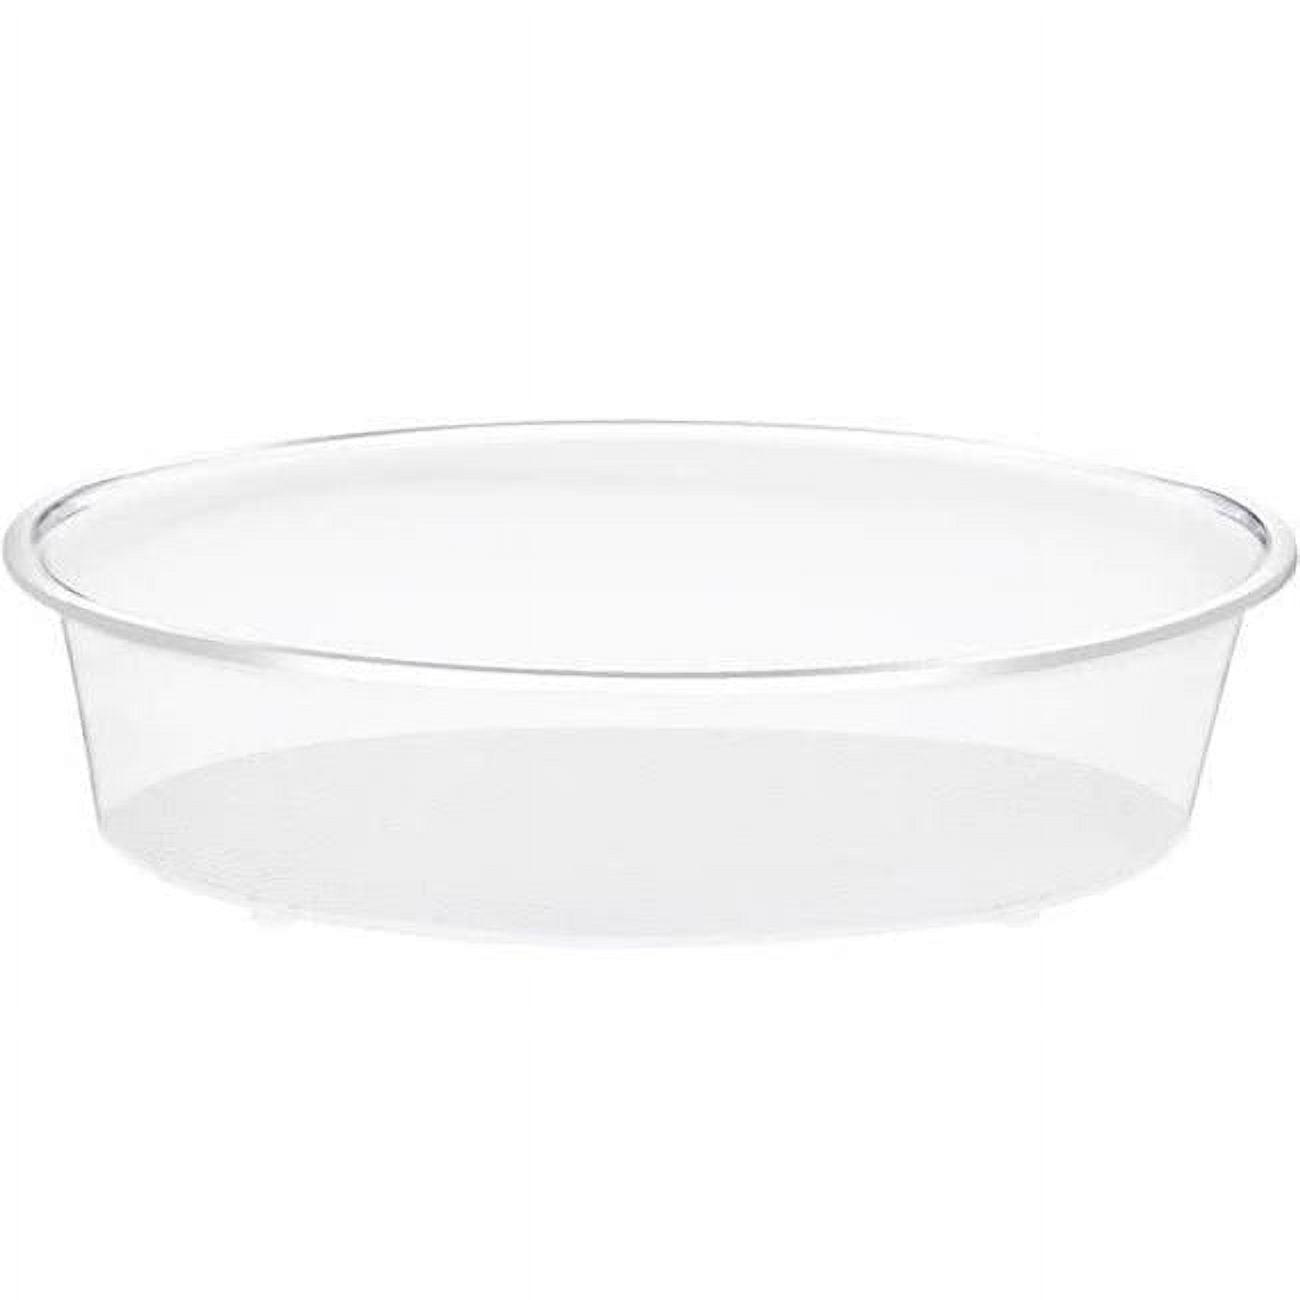 Picture of Cal Mil 316-15 15 in. Round Deep Tray - Clear